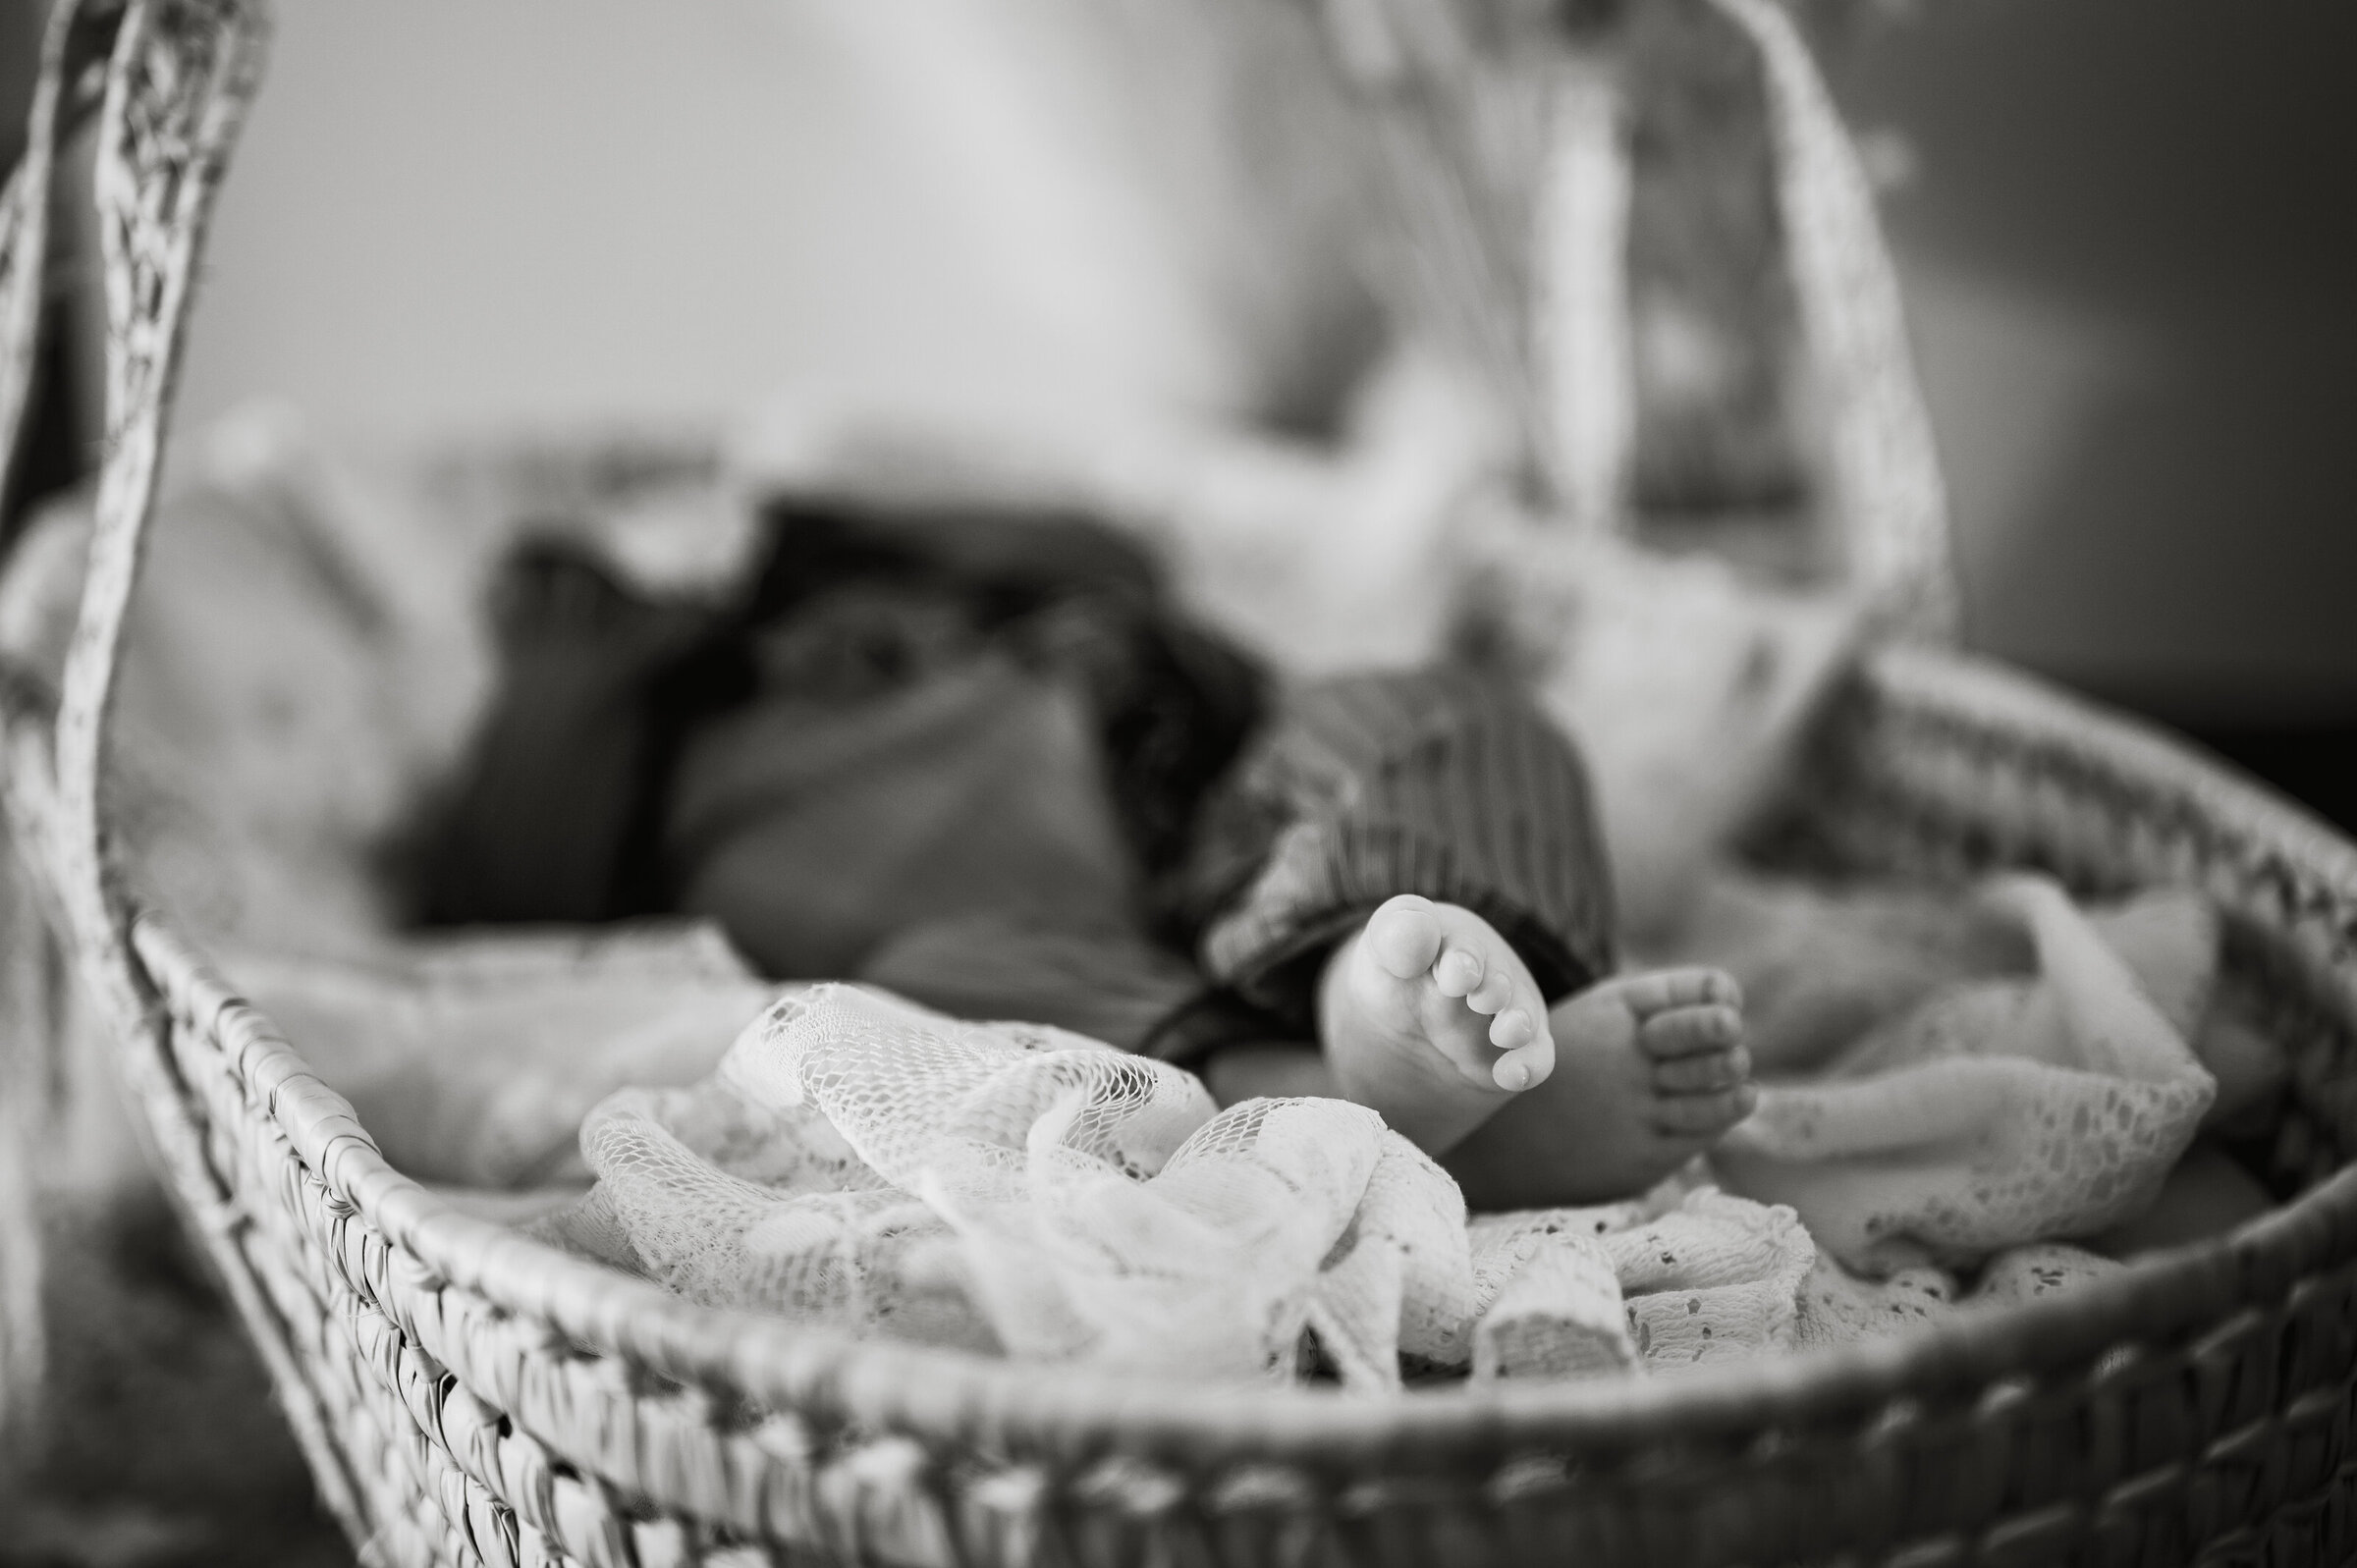 Black and white image of baby's toes while baby lays in a moses basket filed with linens and canvas scraps